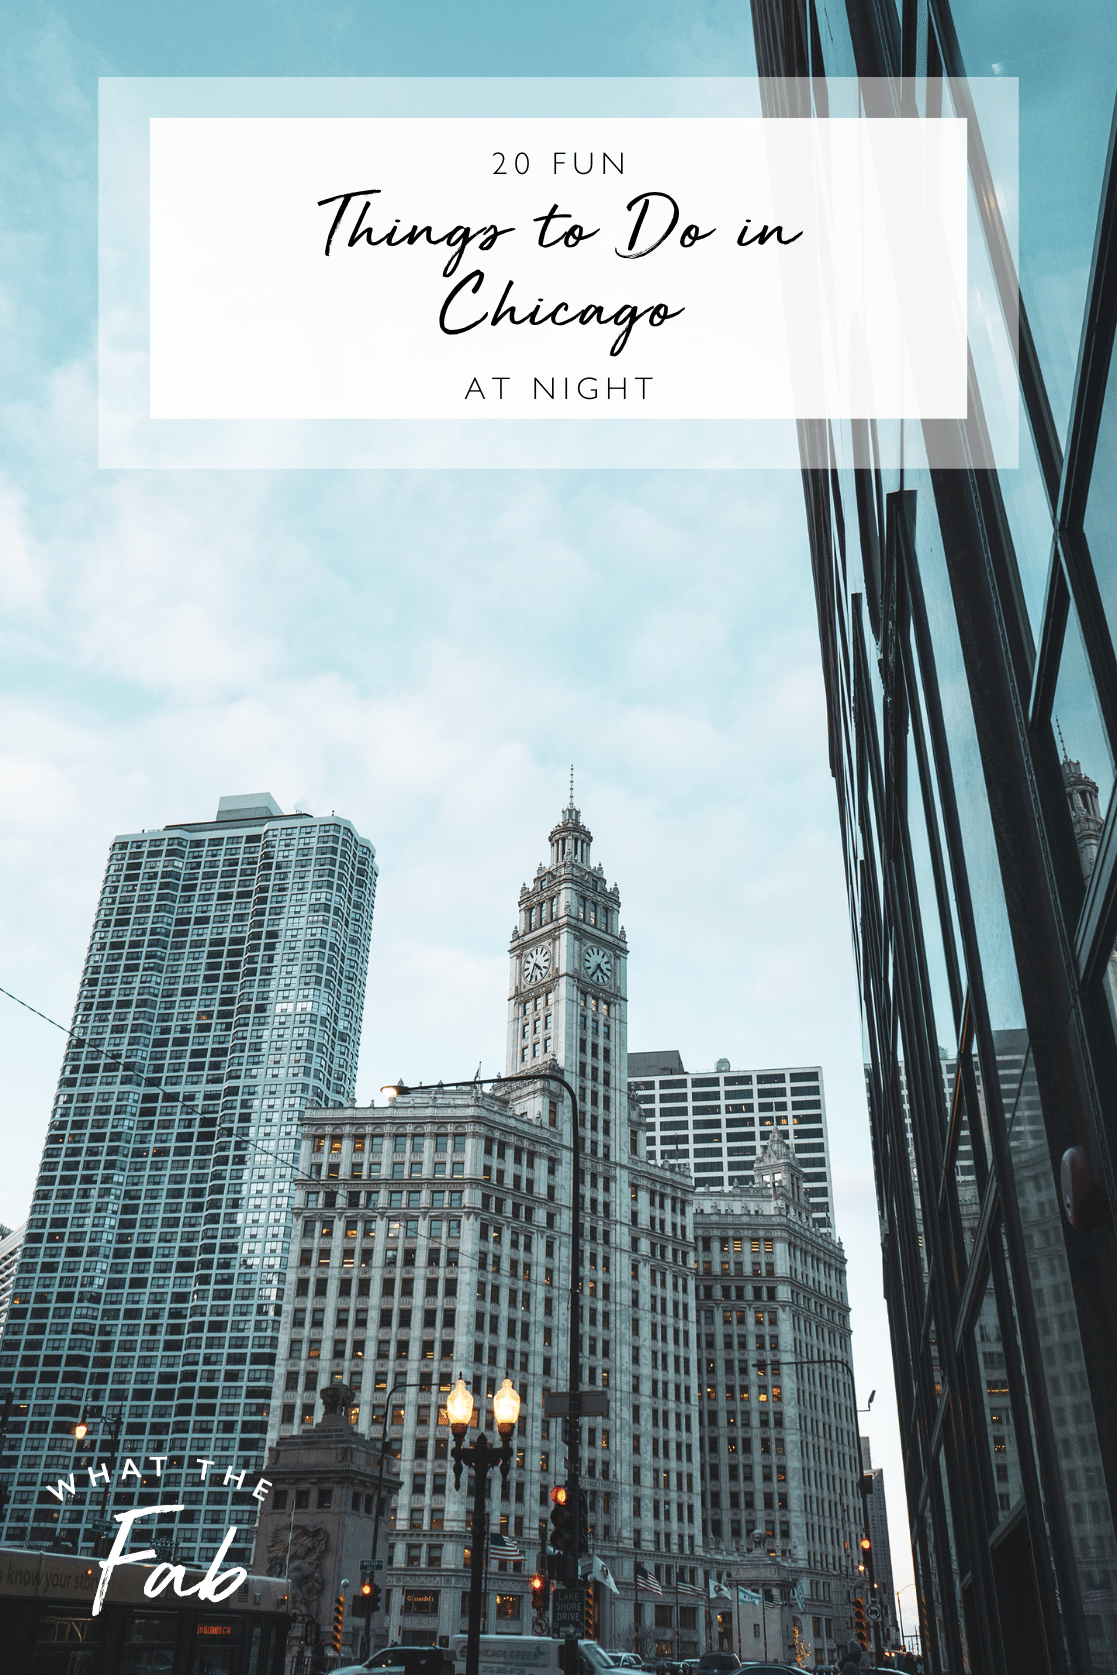 Fun things to do in Chicago at night, by travel blogger What The Fab